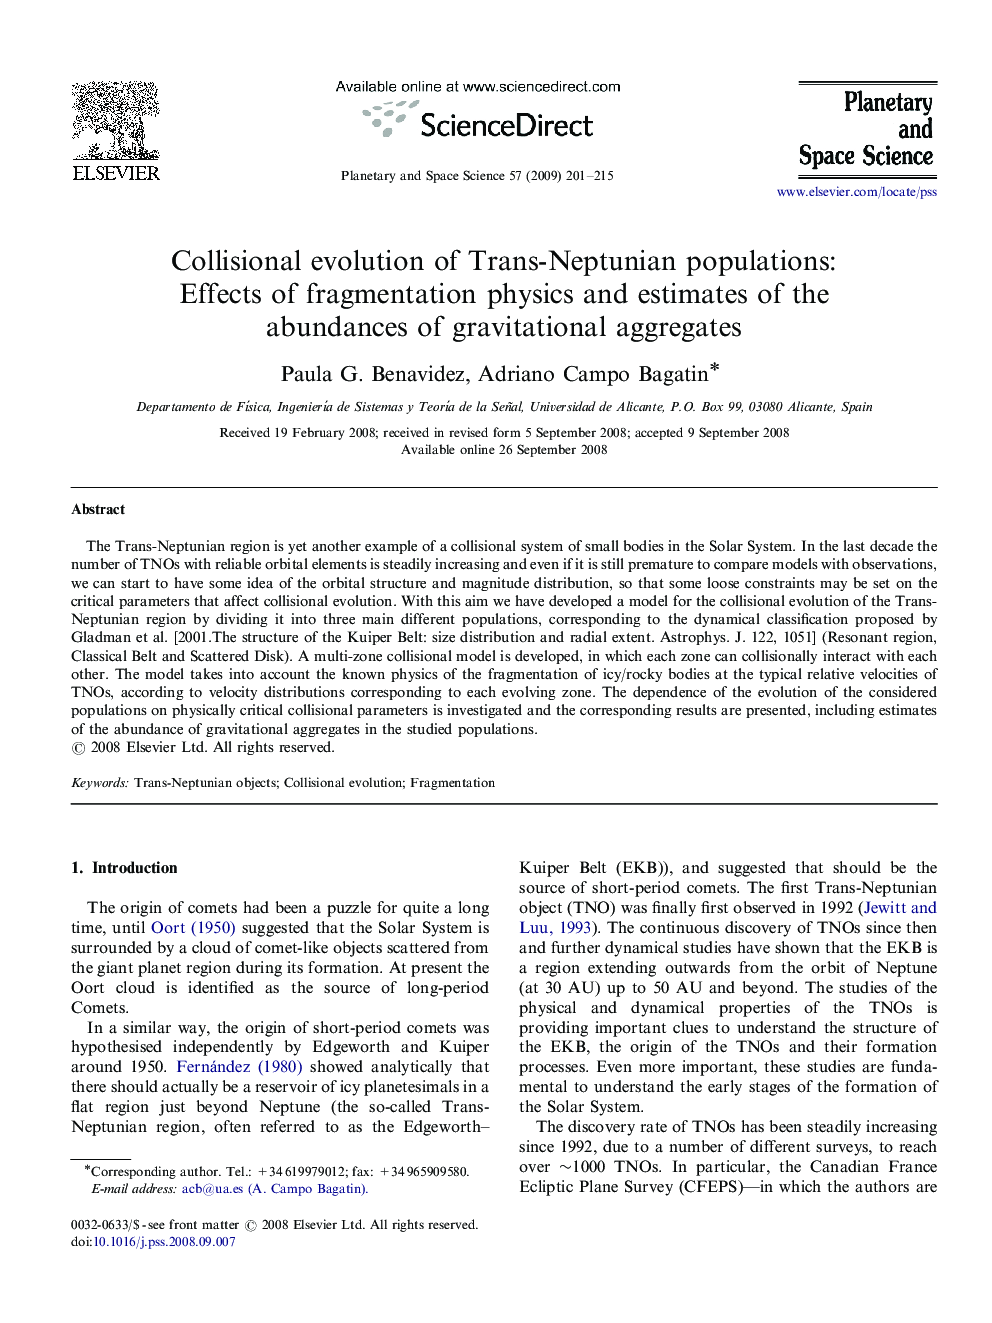 Collisional evolution of Trans-Neptunian populations: Effects of fragmentation physics and estimates of the abundances of gravitational aggregates